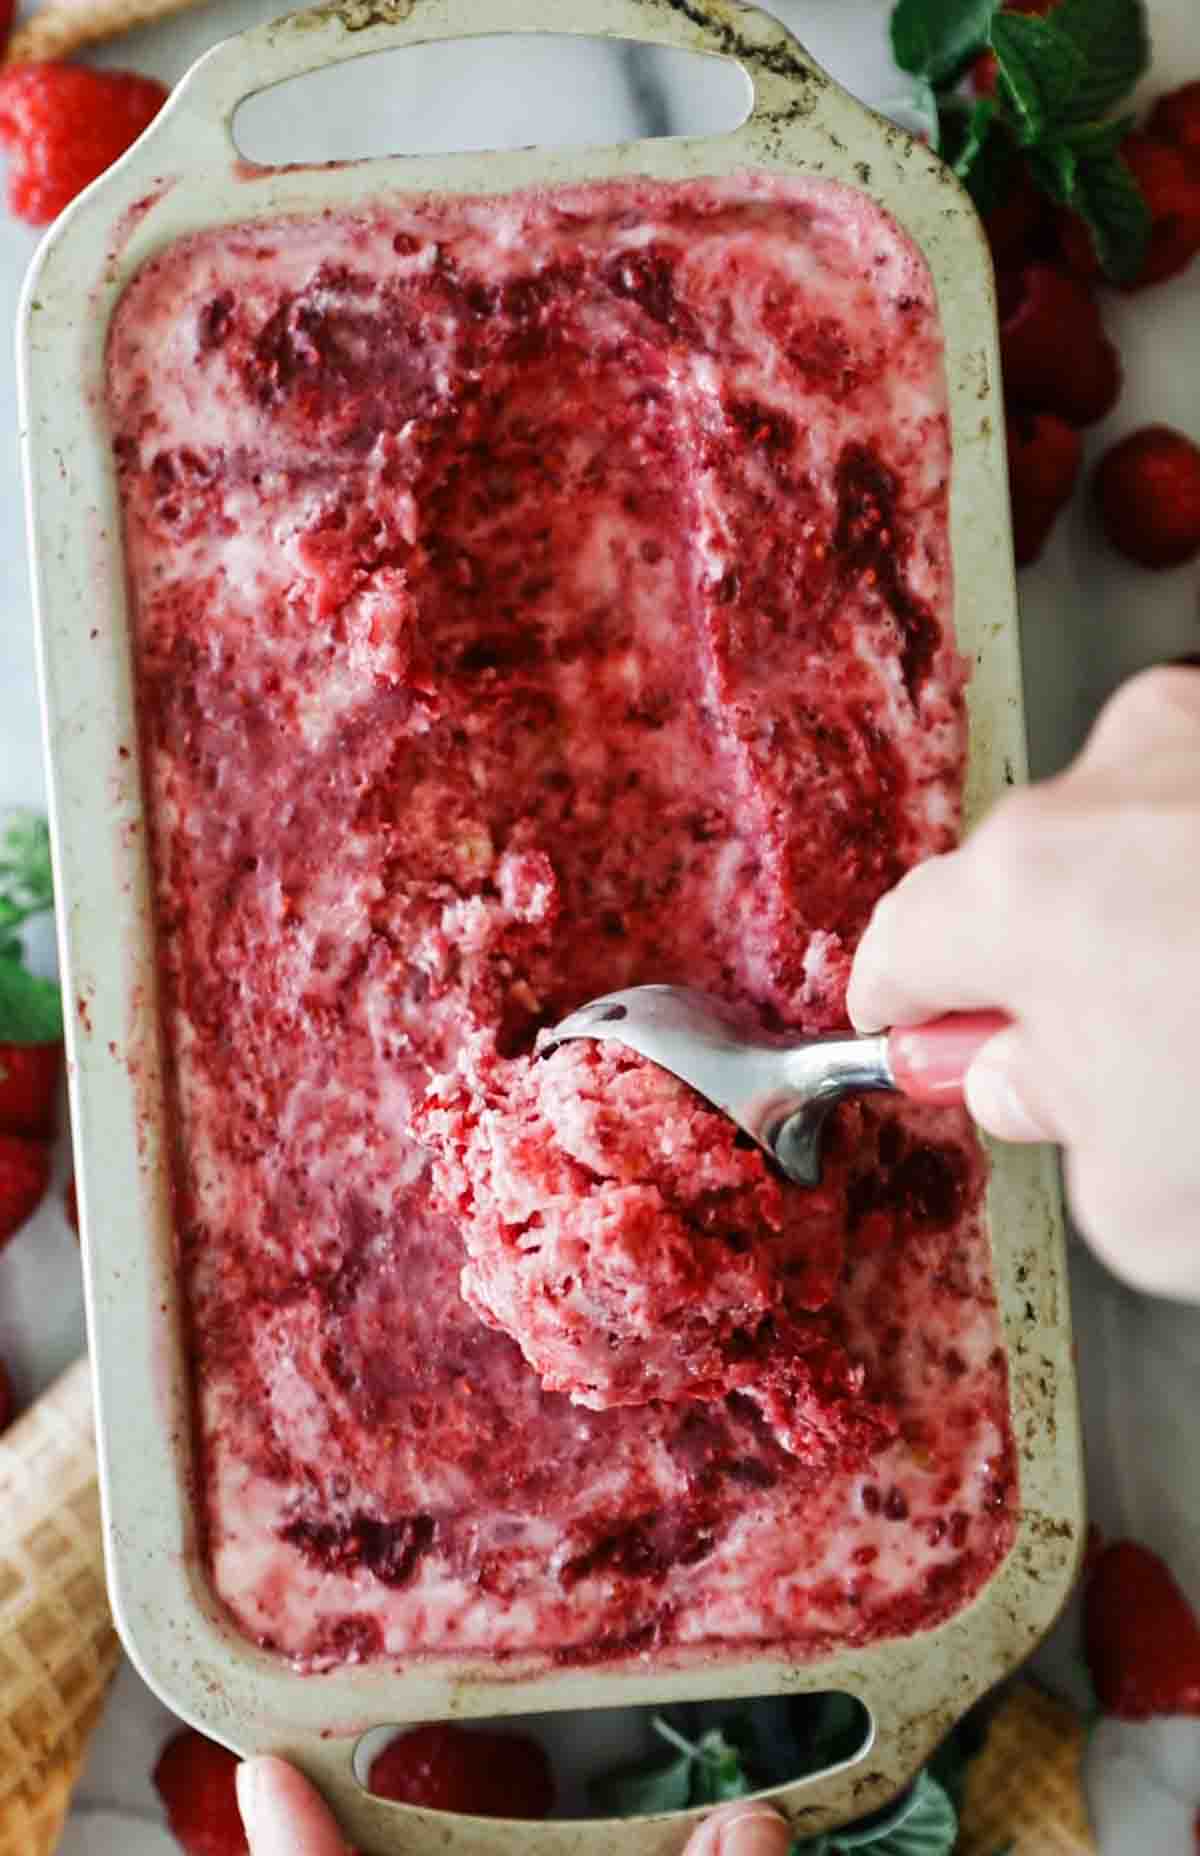 Raspberry ice cream sherbet in a loaf pan with a hand scooping some.